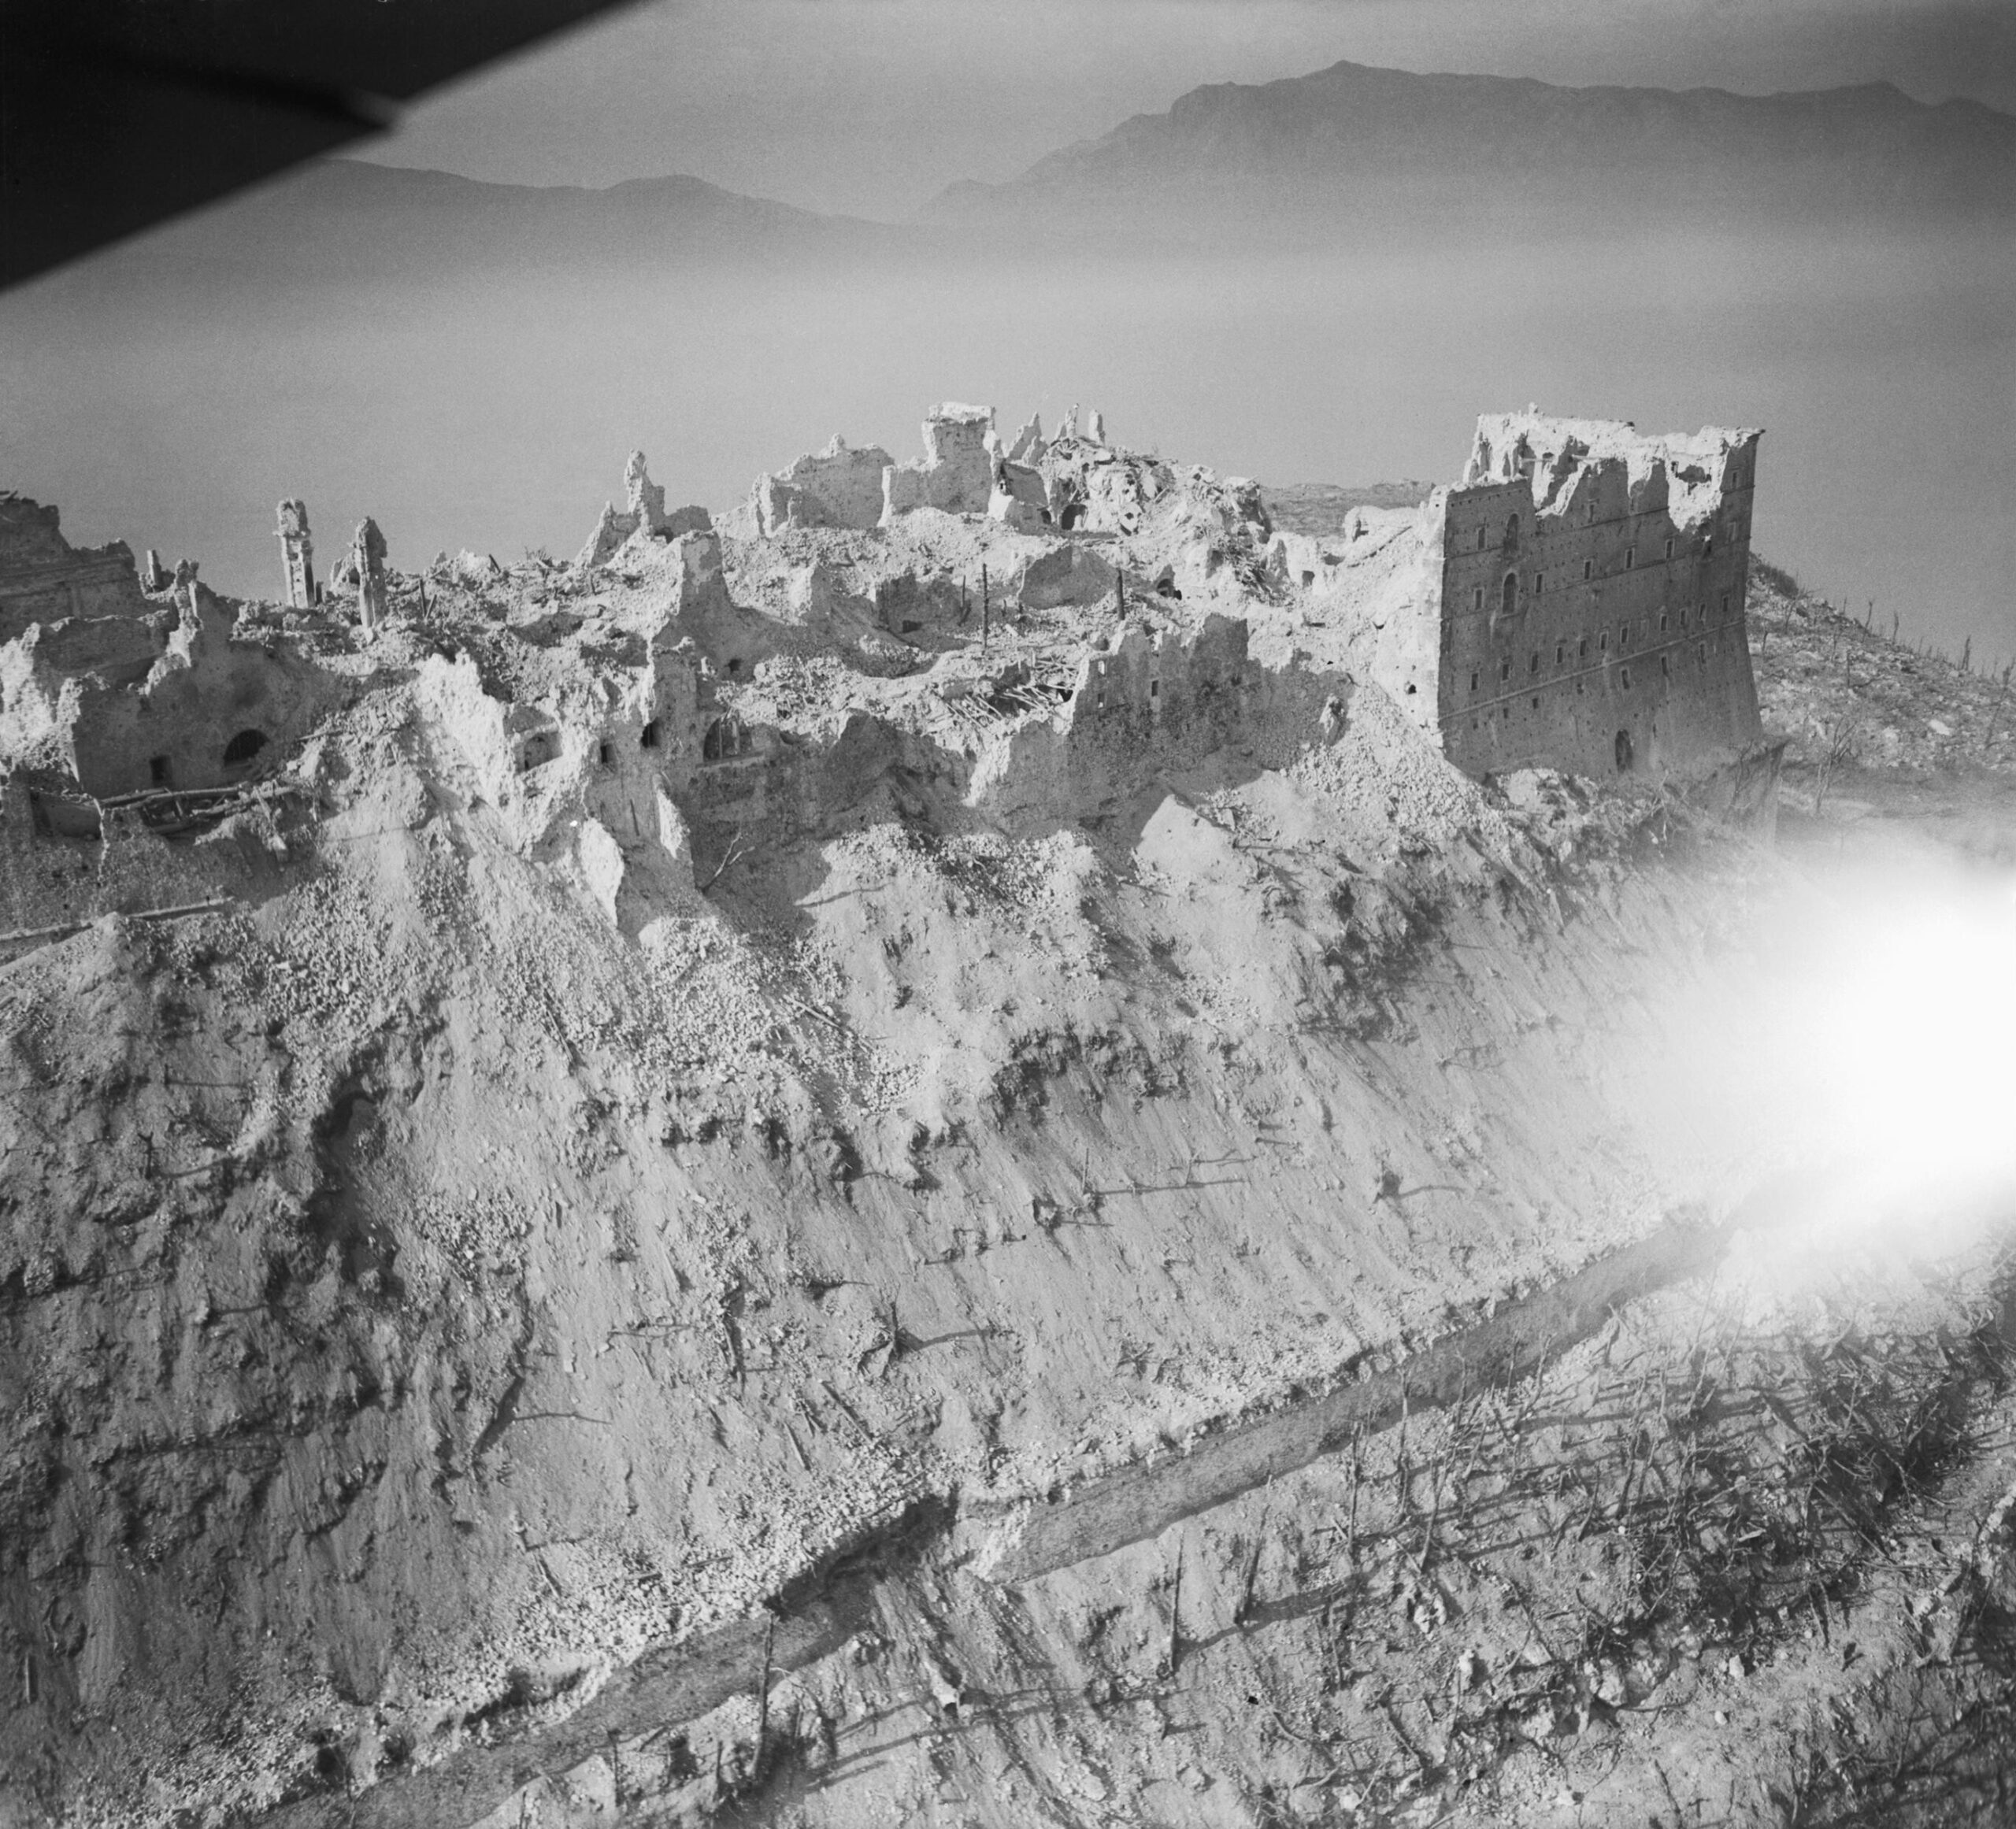 The Abbey of Monte Cassino after the Battle of Monte Cassino in 1944(Photo: Wikimedia Commons )